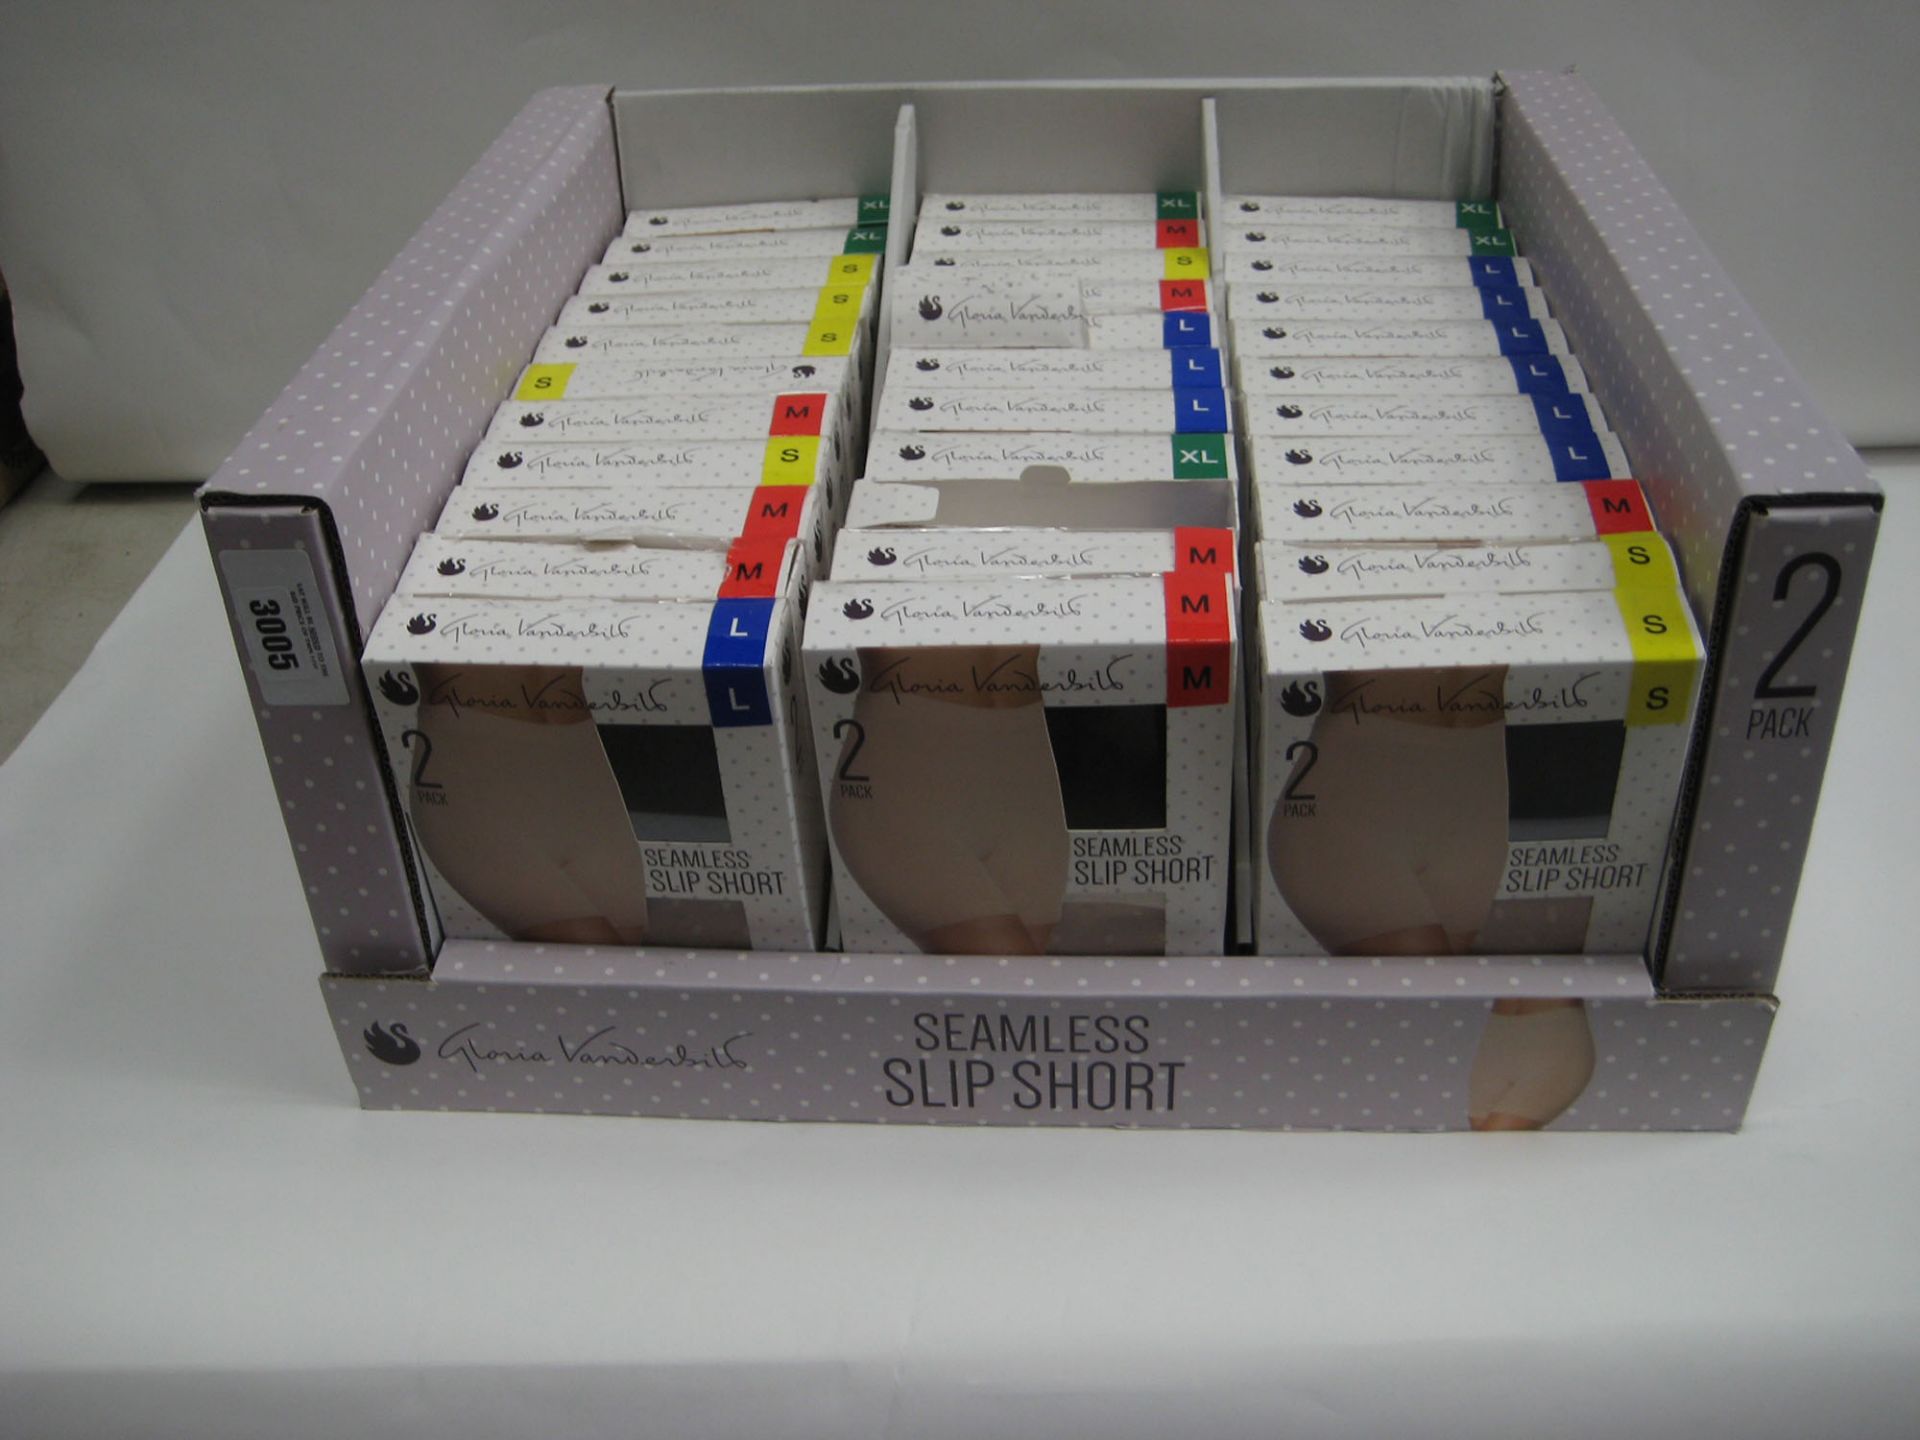 Box containing a qty of seamless slip shorts by Loreal Vanderbilt sizes S to XL